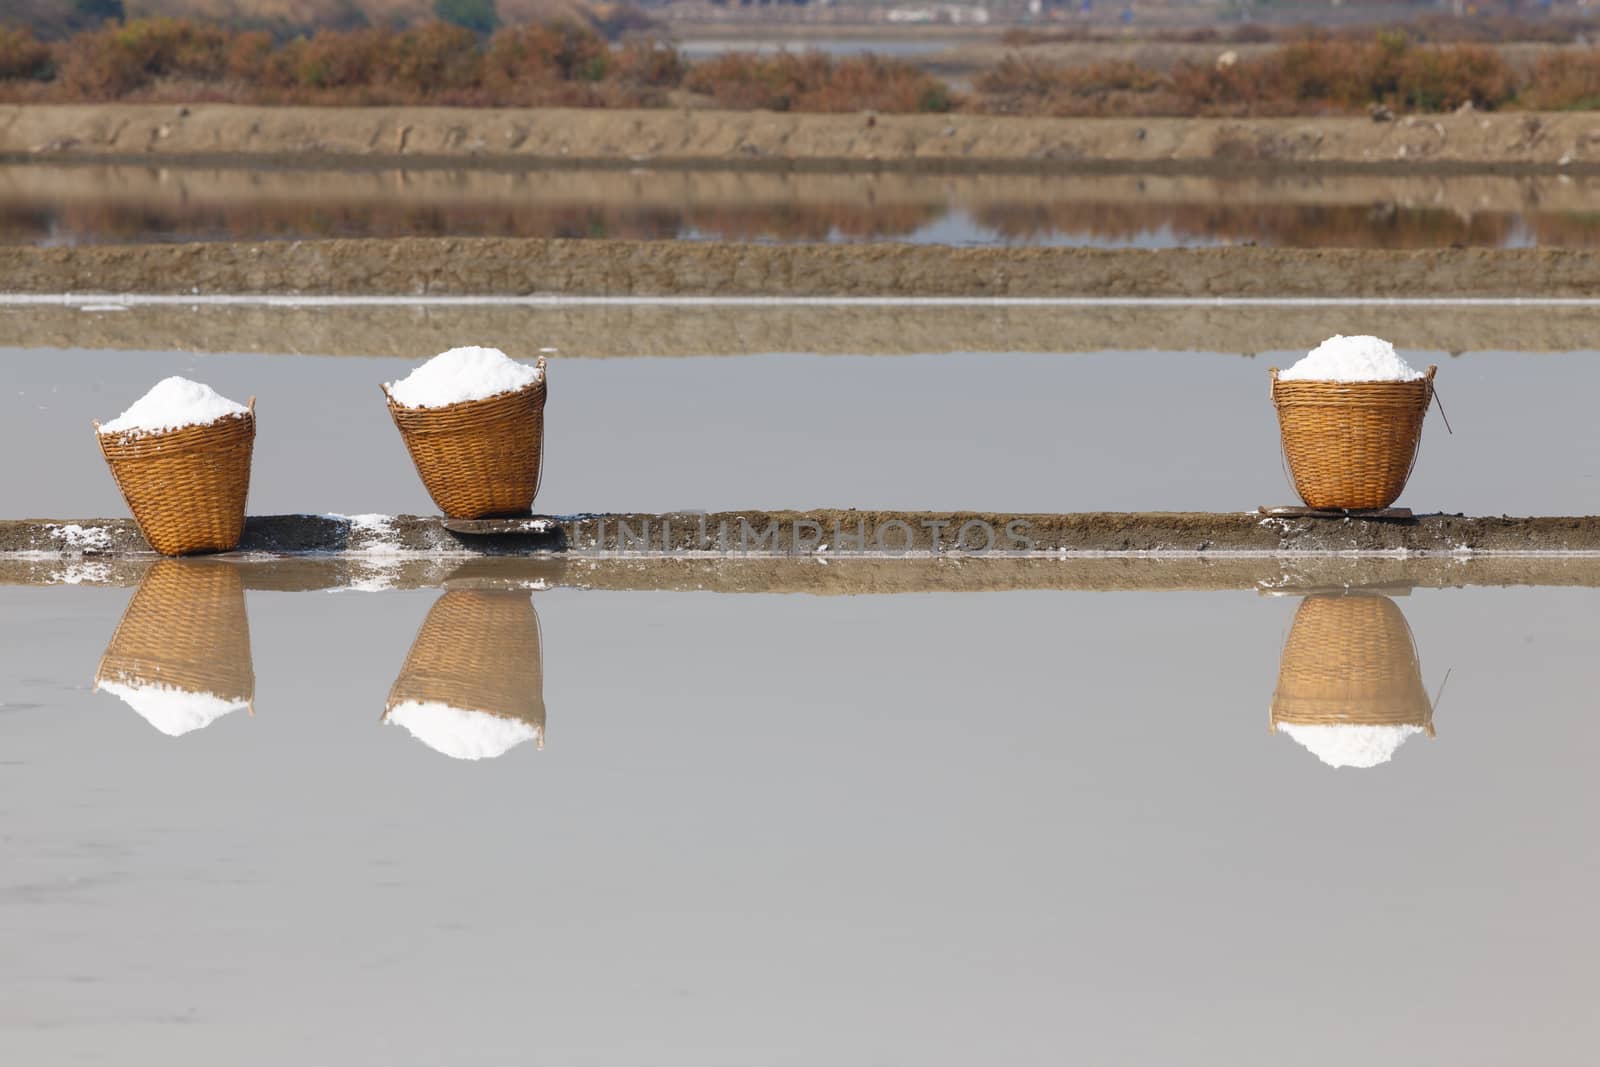 Sea salt in the bamboo basket and its reflection on salt farm.